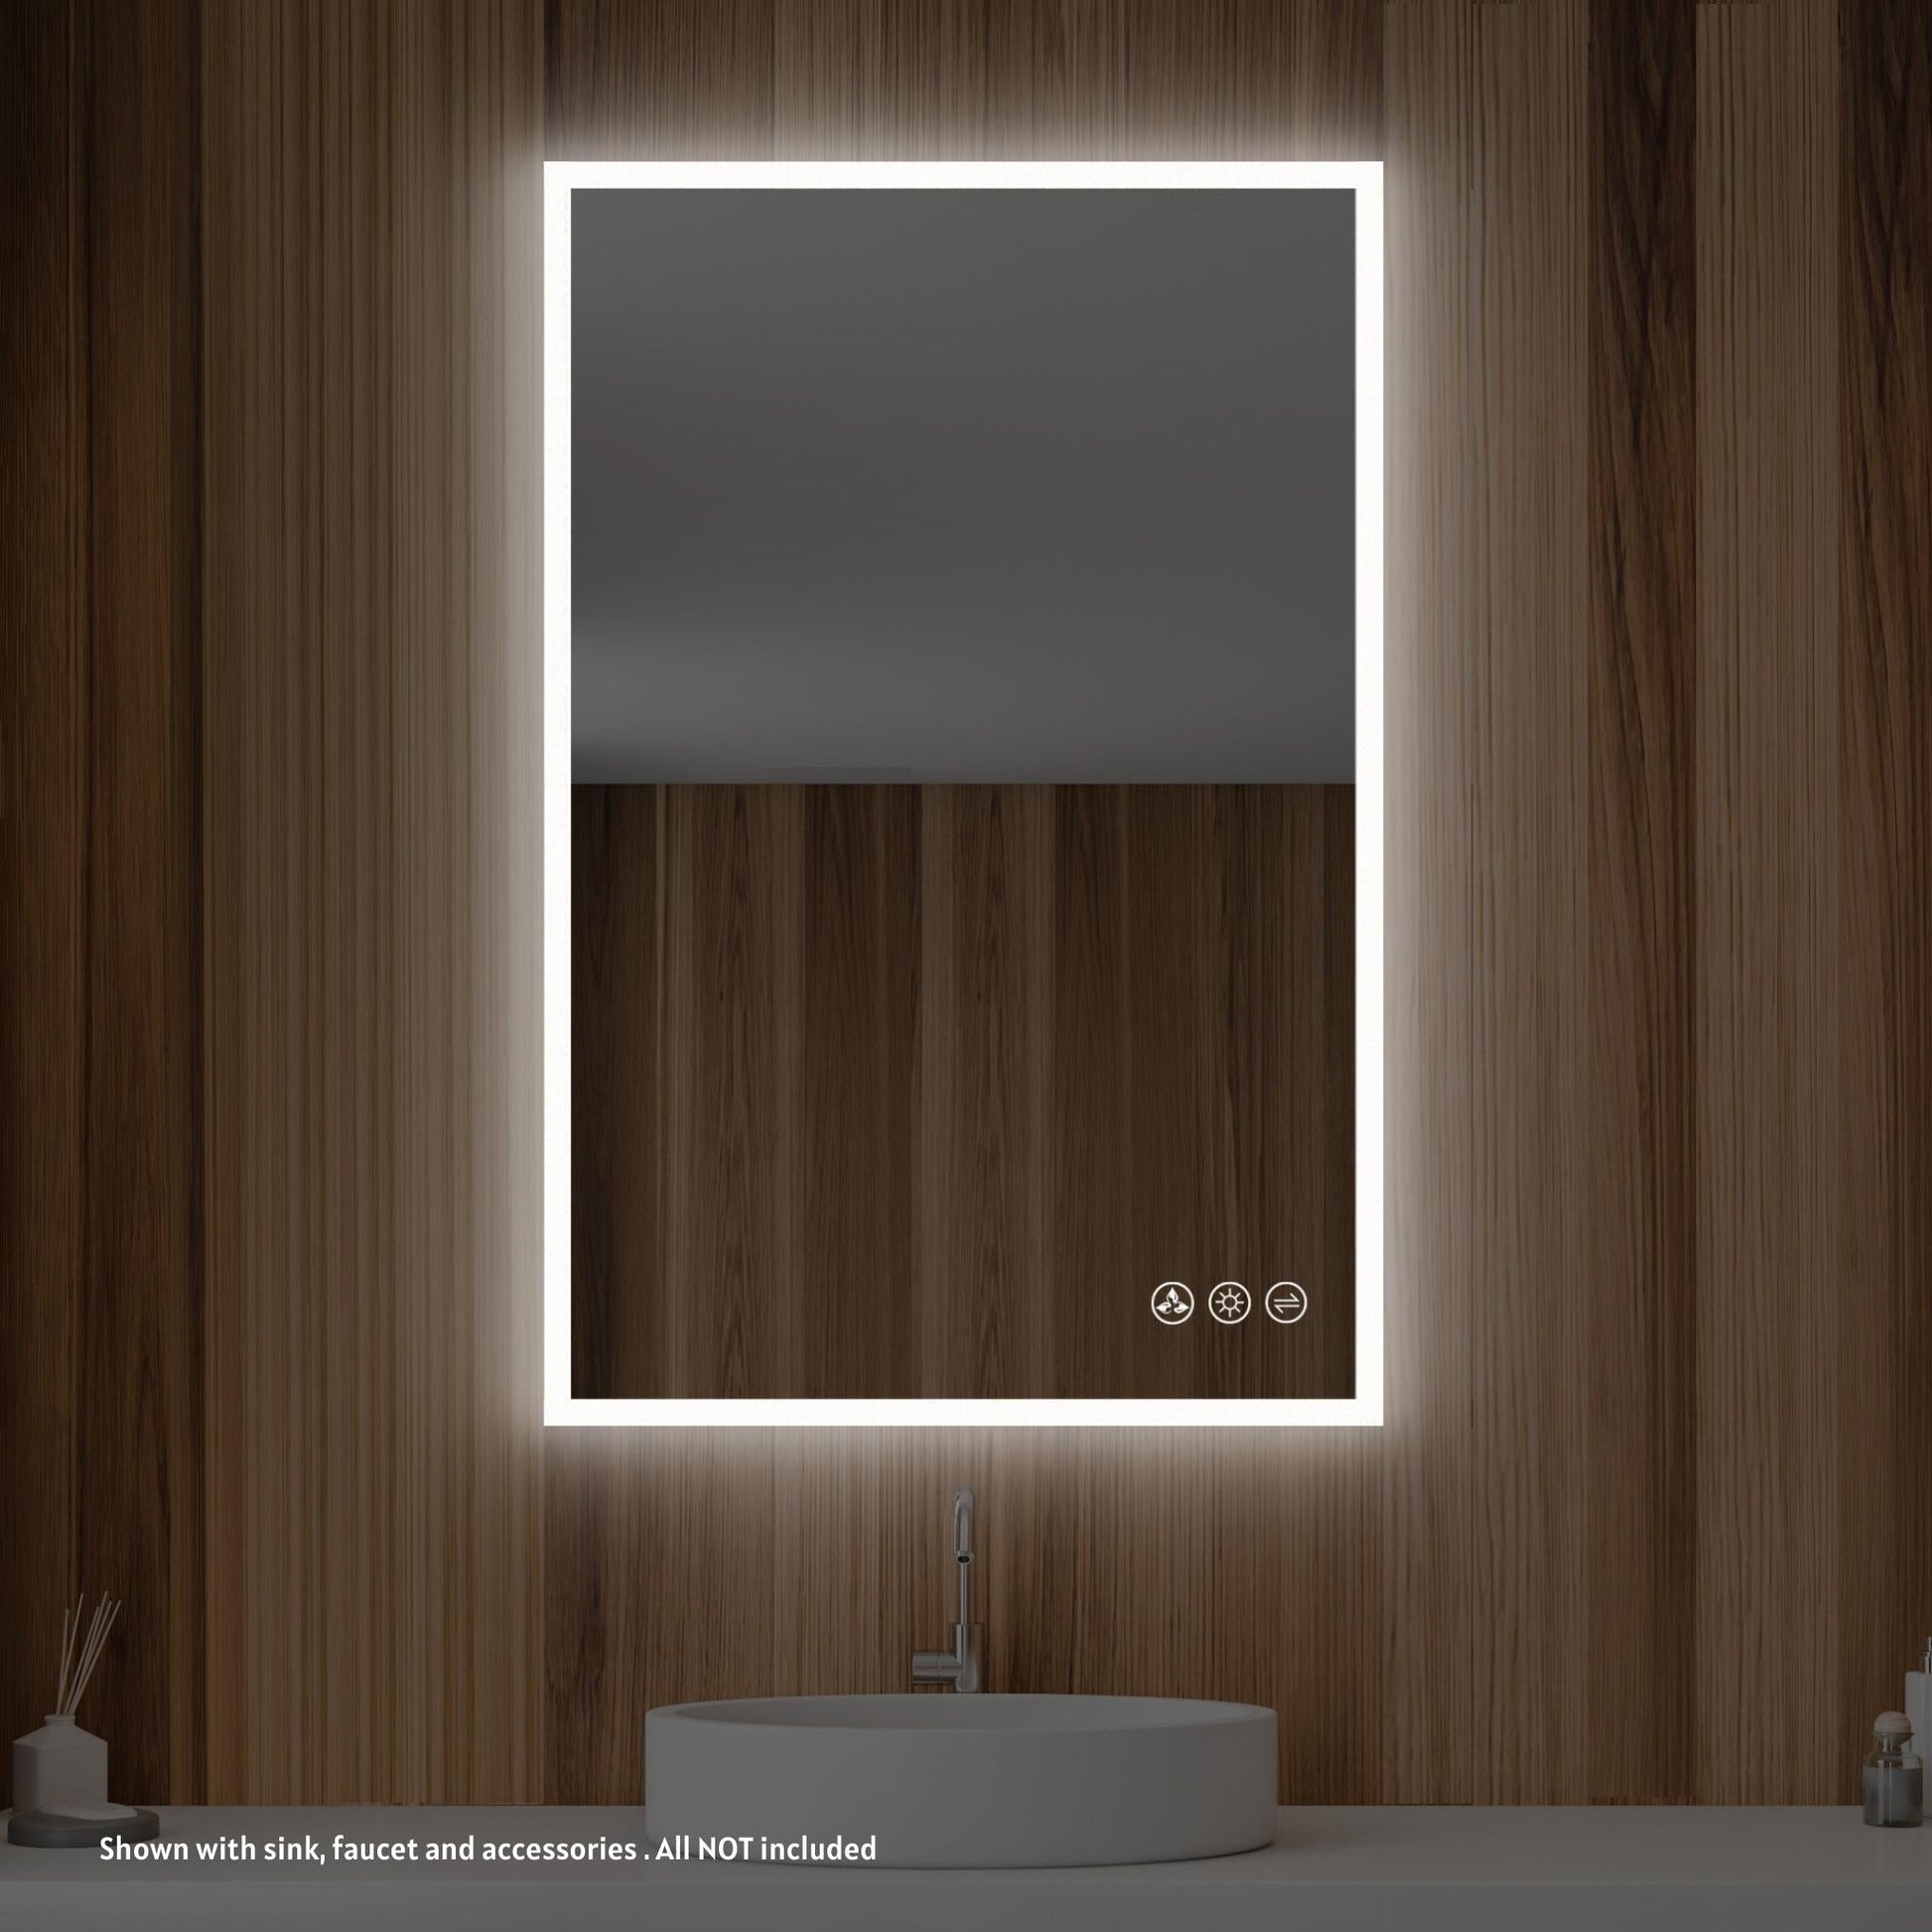 Blossom Beta 24" x 36" Wall-Mounted Rectangle LED Mirror With Frosted Sides